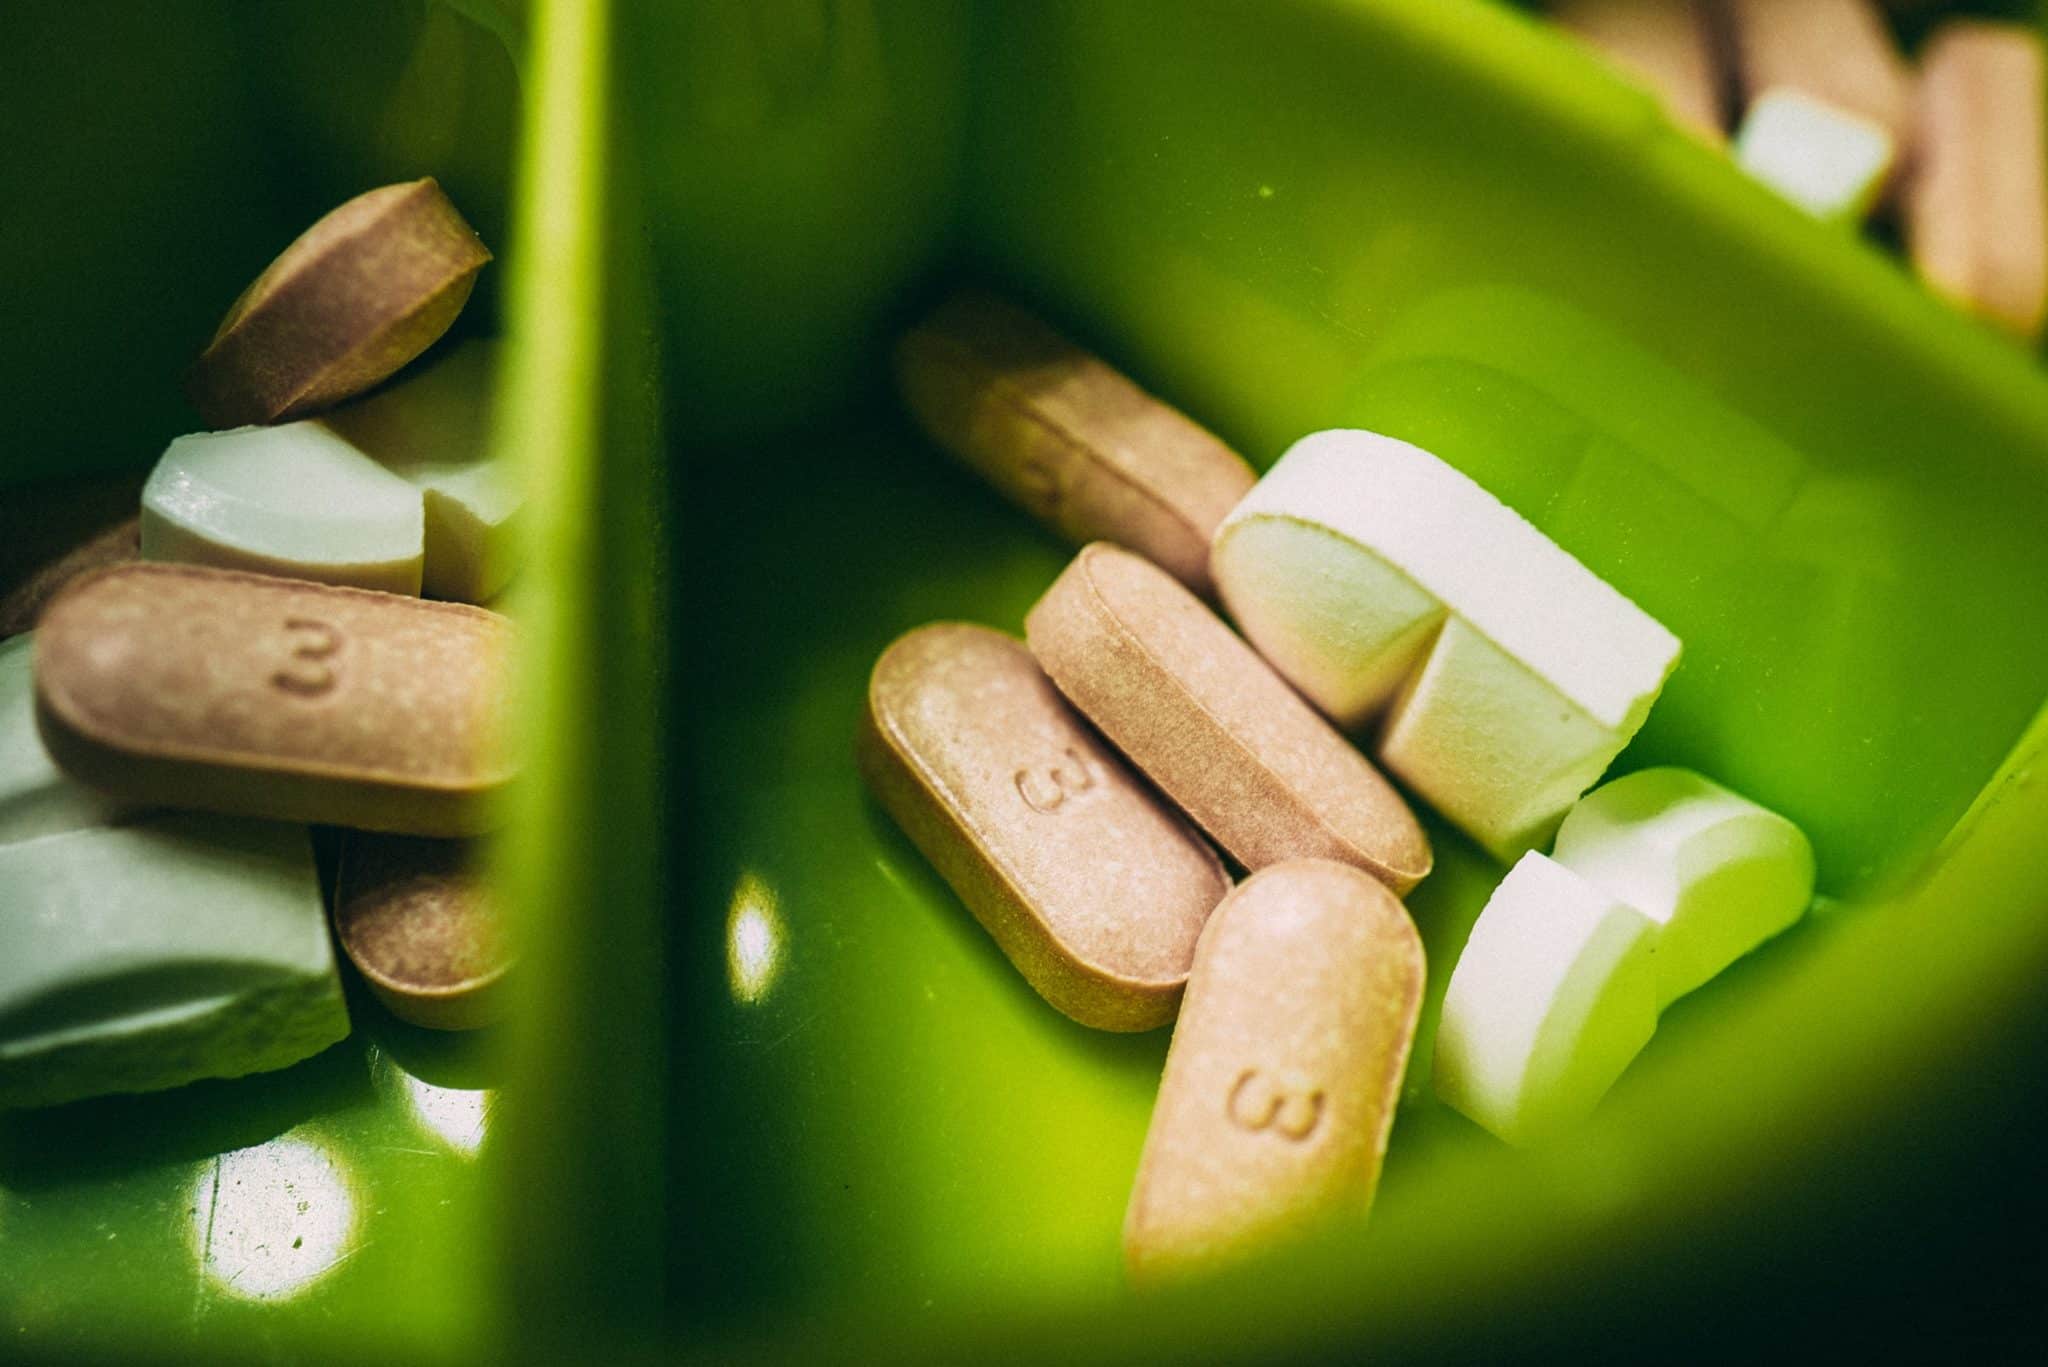 photo of supplements in green dish